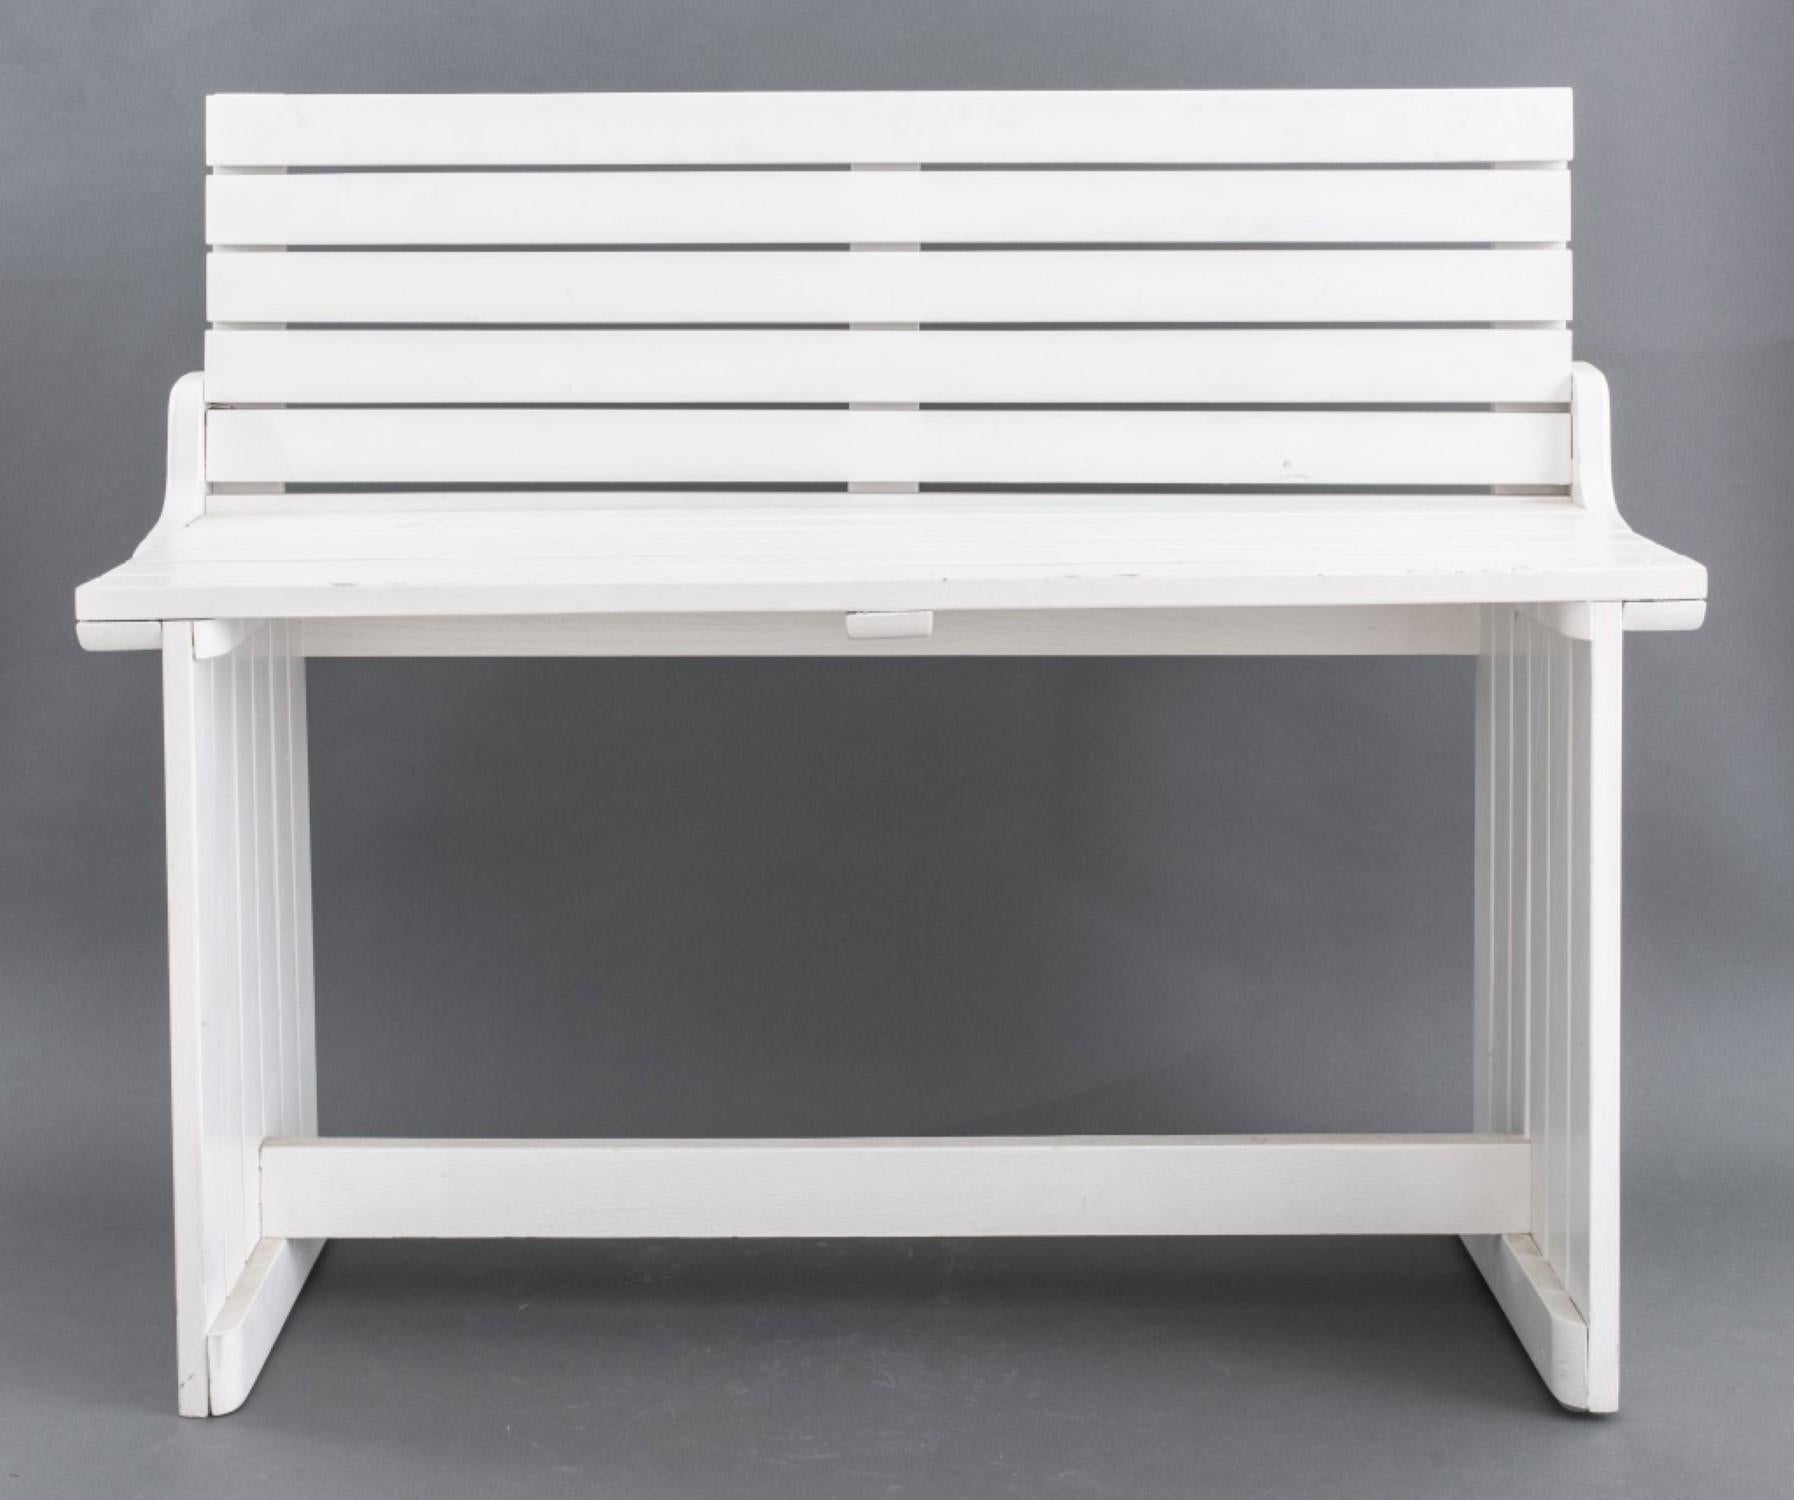 Modern white painted wood hallway bench with a backrest.

28.5 inches in height, 36 inches in width, and 13.5 inches in depth.